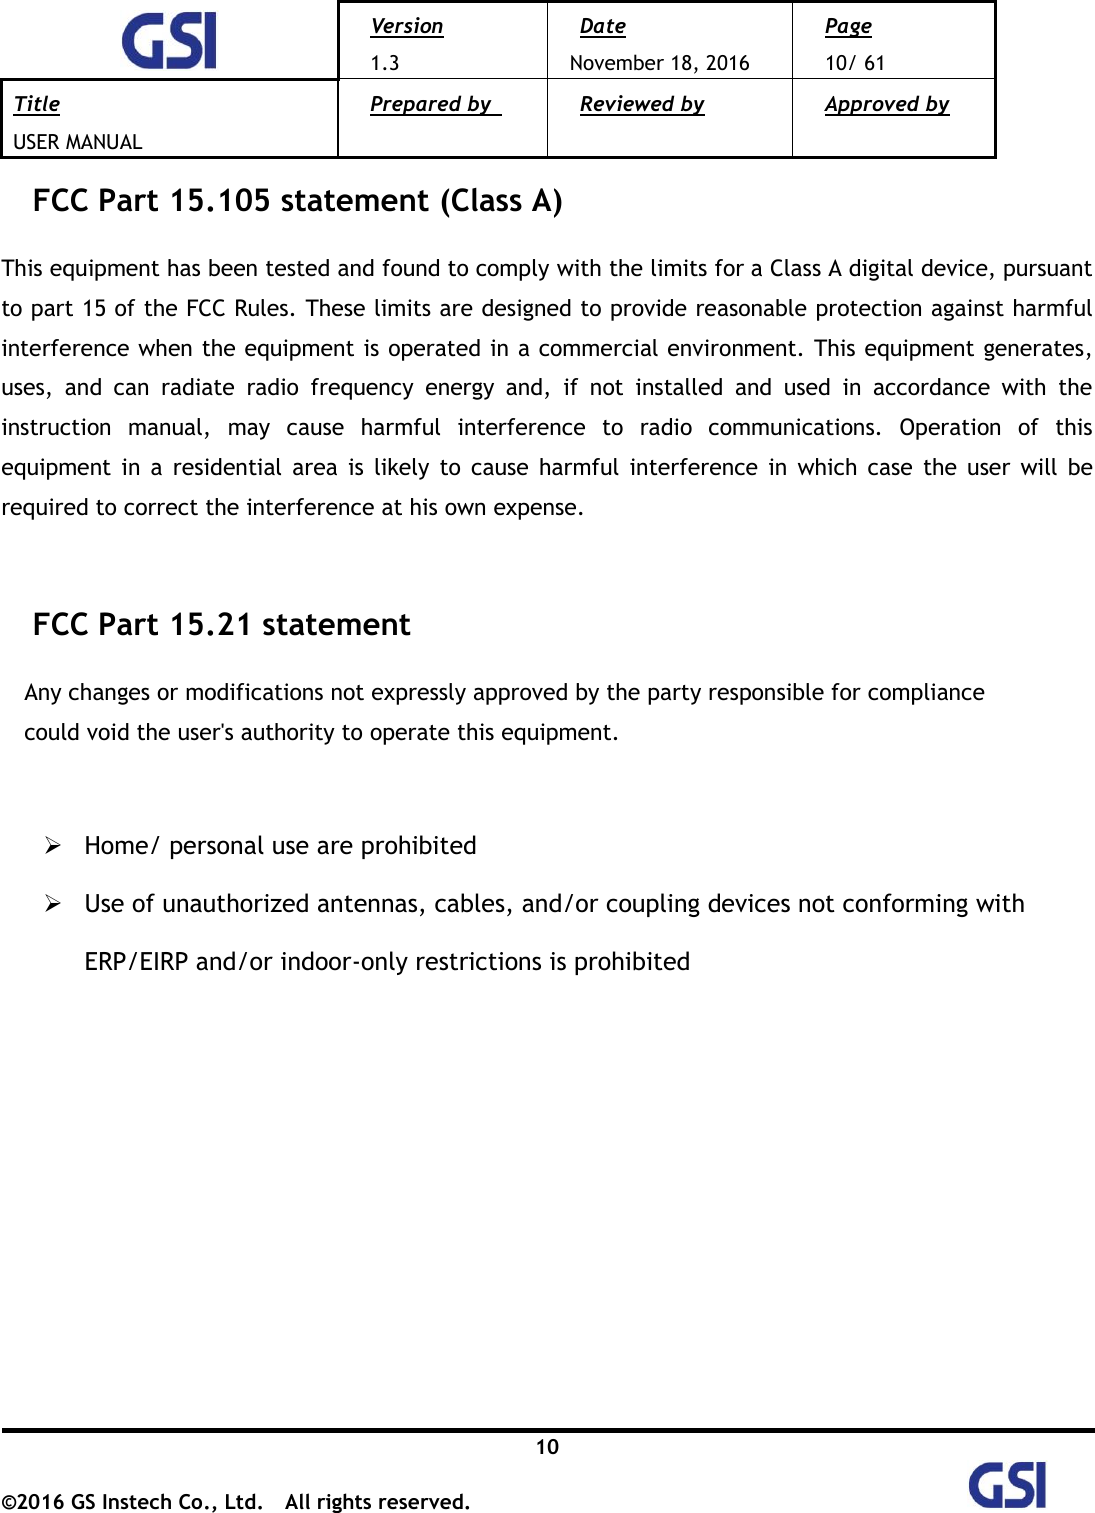  Version 1.3 Date November 18, 2016 Page 10/ 61 Title USER MANUAL Prepared by   Reviewed by  Approved by   10 ©2016 GS Instech Co., Ltd.  All rights reserved.   FCC Part 15.105 statement (Class A)  This equipment has been tested and found to comply with the limits for a Class A digital device, pursuant to part 15 of the FCC Rules. These limits are designed to provide reasonable protection against harmful interference when the equipment is operated in a commercial environment. This equipment generates, uses,  and  can  radiate  radio  frequency  energy  and,  if  not  installed  and  used  in  accordance  with  the instruction  manual,  may  cause  harmful  interference  to  radio  communications.  Operation  of  this equipment  in  a  residential  area  is  likely  to  cause  harmful  interference  in  which case  the  user  will  be required to correct the interference at his own expense.   FCC Part 15.21 statement  Any changes or modifications not expressly approved by the party responsible for compliance   could void the user&apos;s authority to operate this equipment.    Home/ personal use are prohibited  Use of unauthorized antennas, cables, and/or coupling devices not conforming with ERP/EIRP and/or indoor‐only restrictions is prohibited  